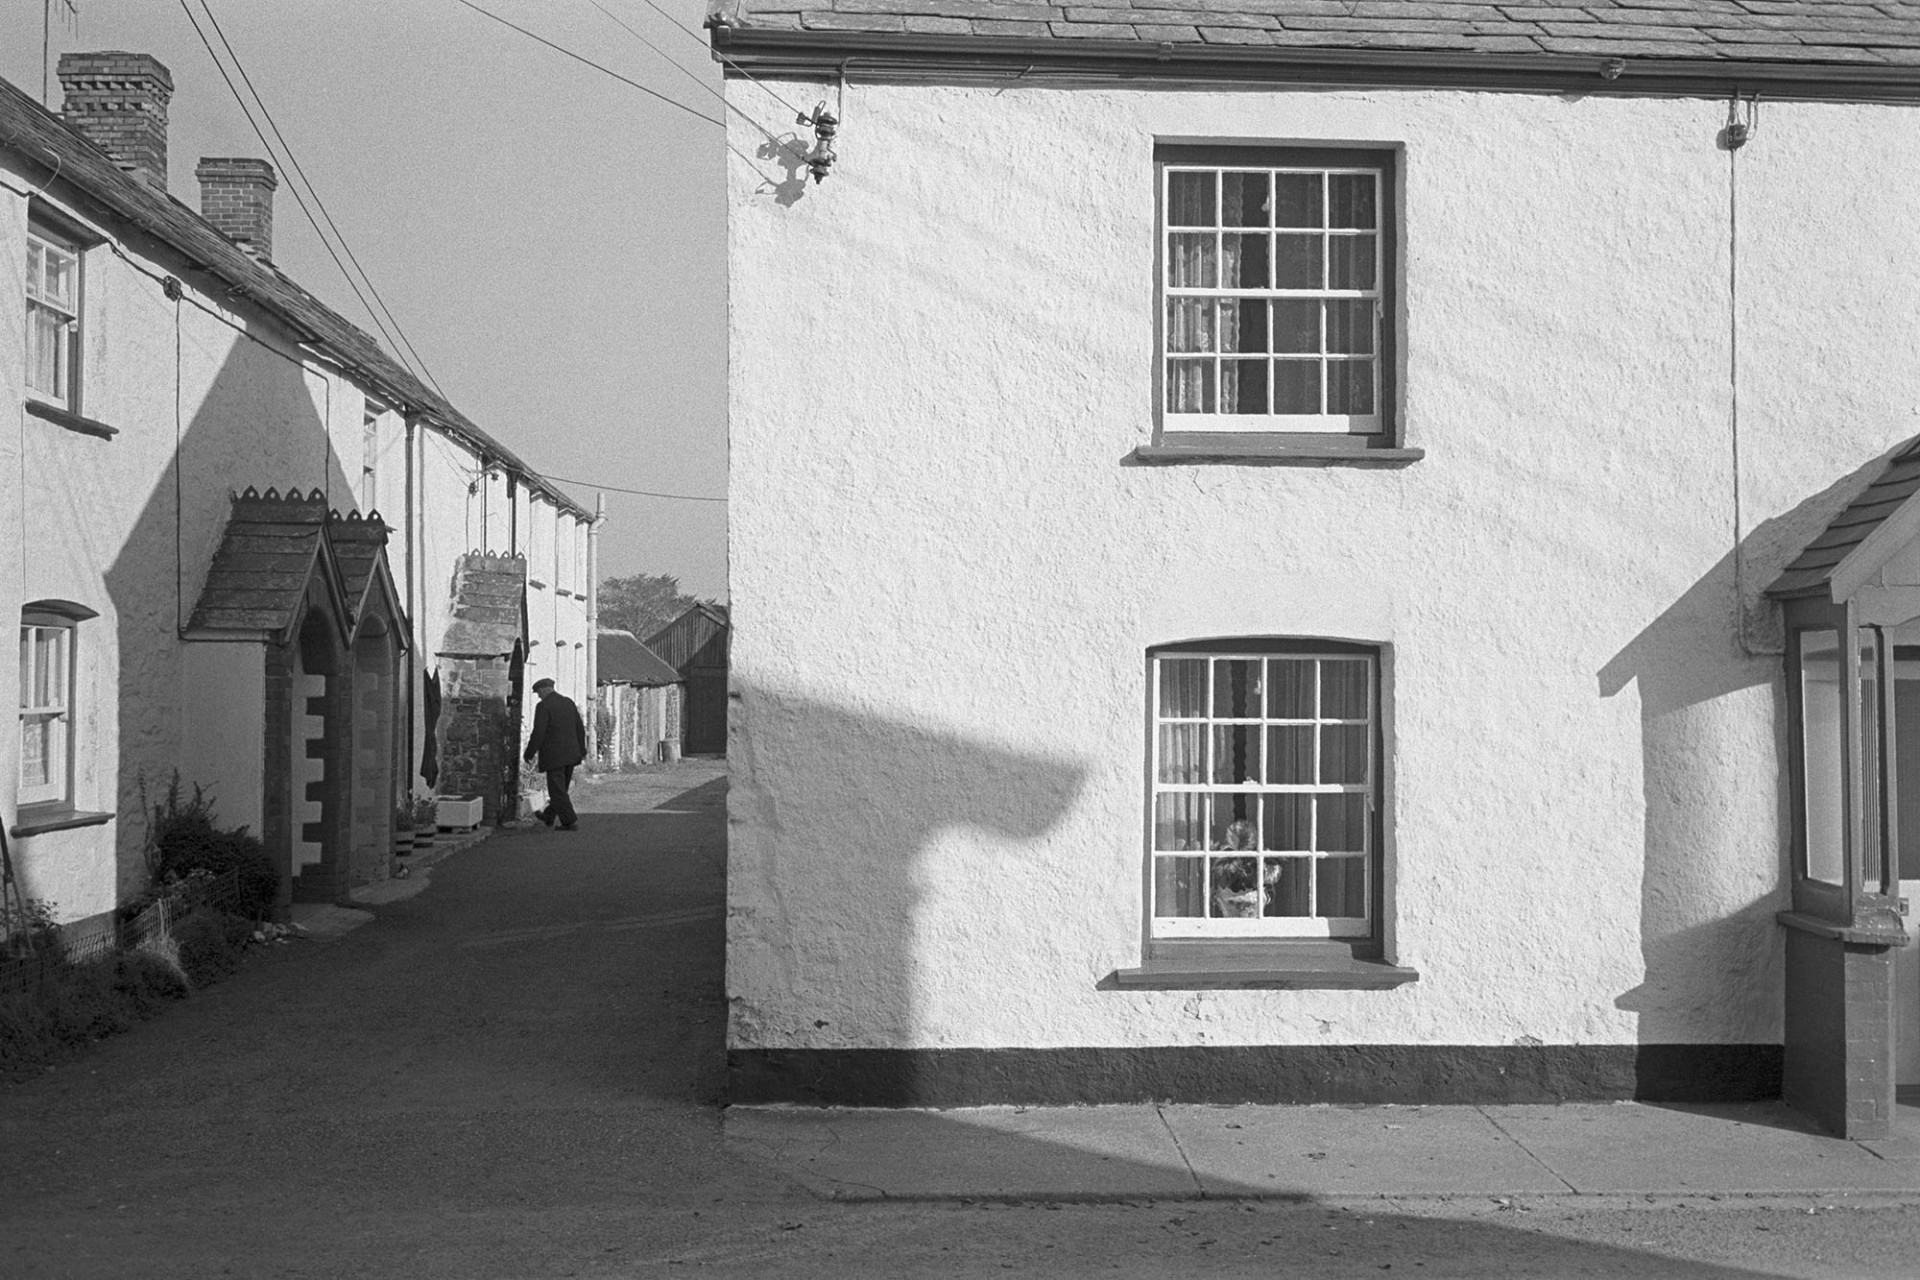 House and row of cottages.
[A man walking down a street at Bradworthy with a row of cottages with porches.]